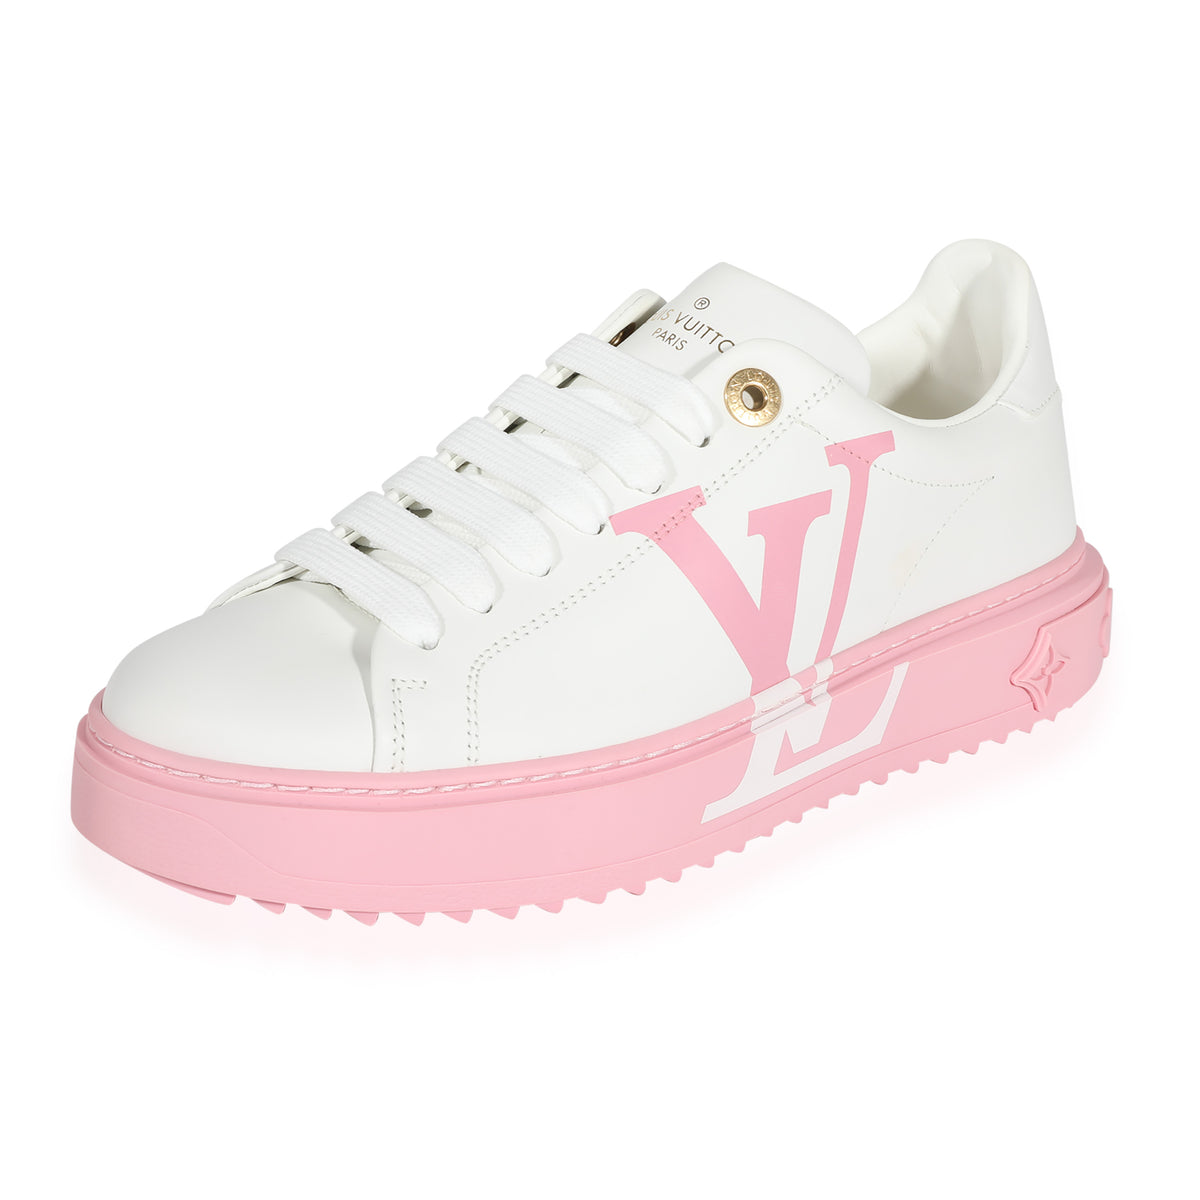 Louis Vuitton Pink Monogram Canvas and Leather Time Out Sneakers Size 37  Louis Vuitton